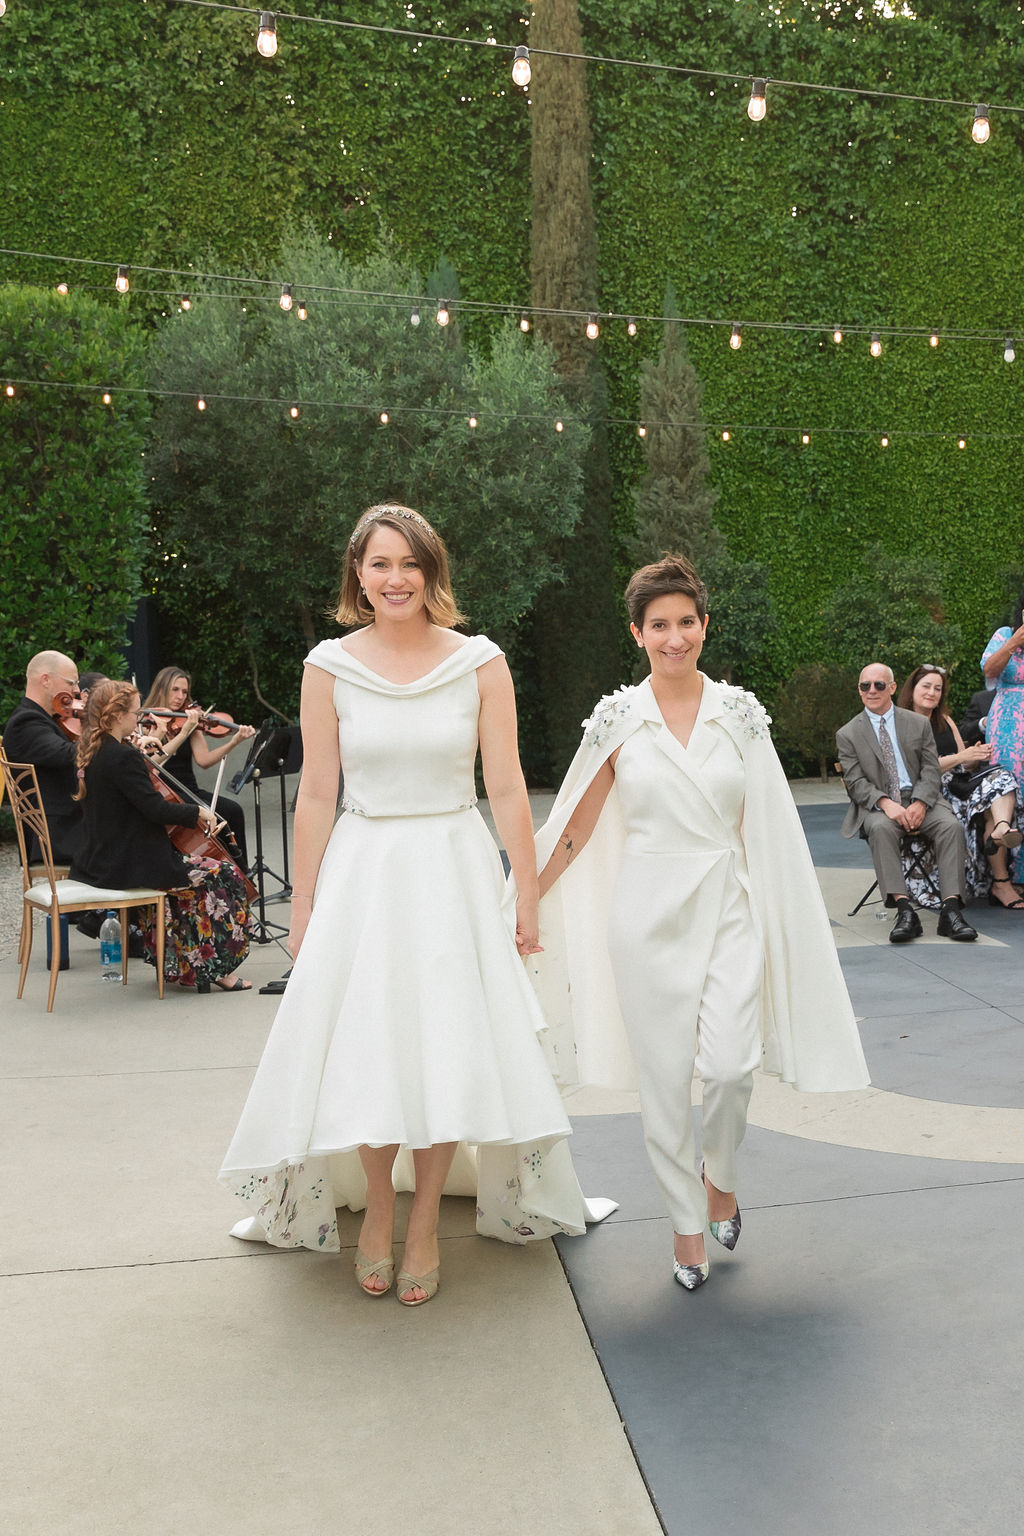 two brides wearing coordinating bridal attire hold hands during recessional of outdoor wedding ceremony at the Fig House